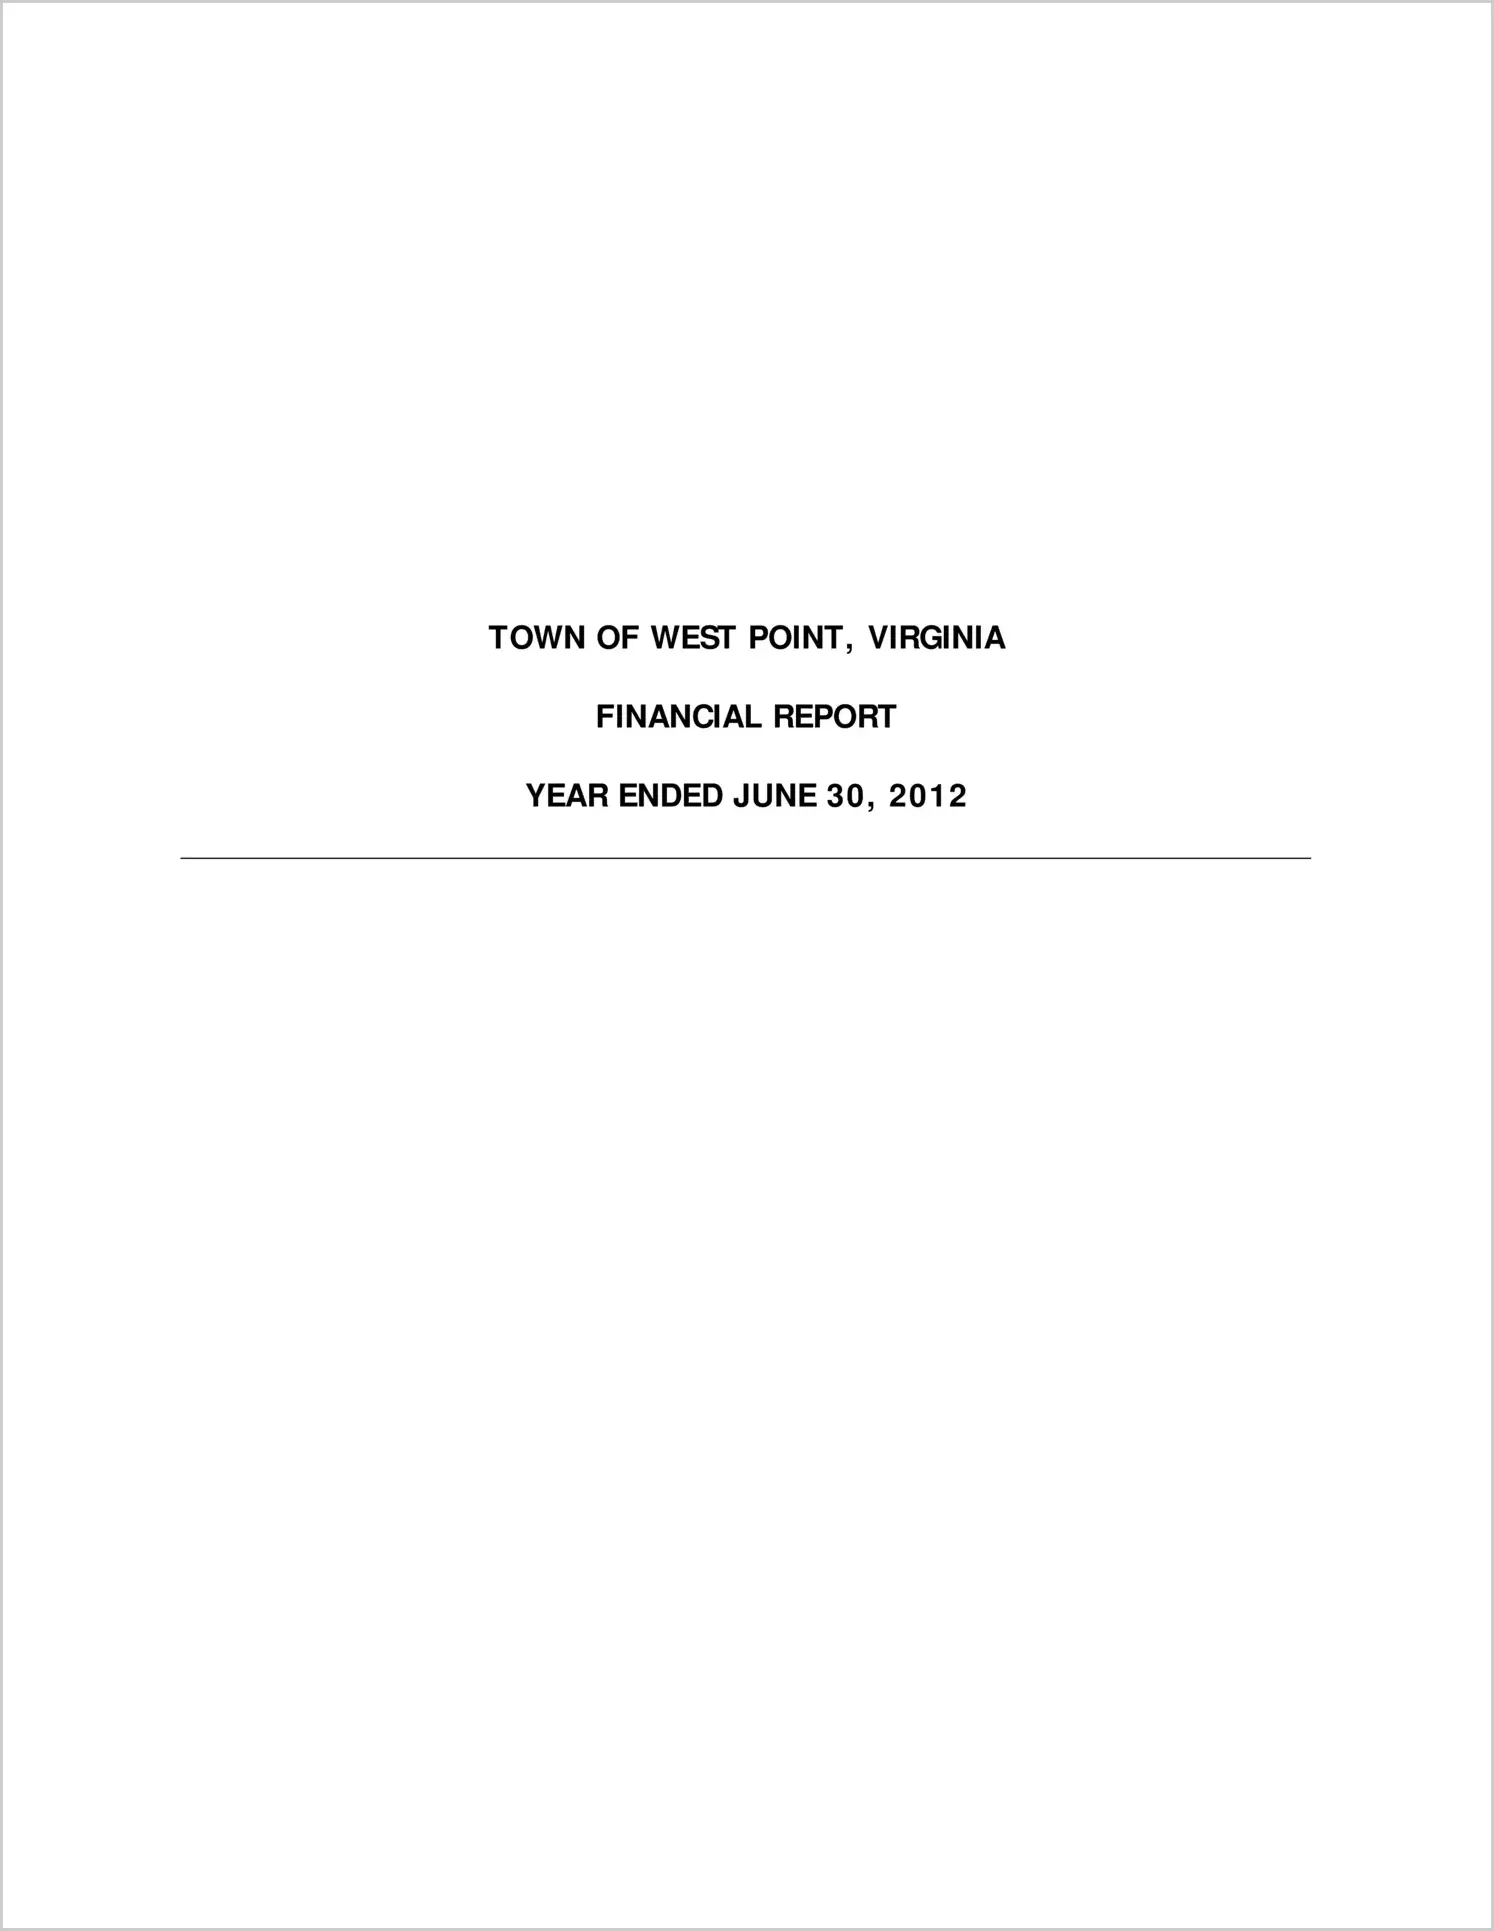 2012 Annual Financial Report for Town of West Point